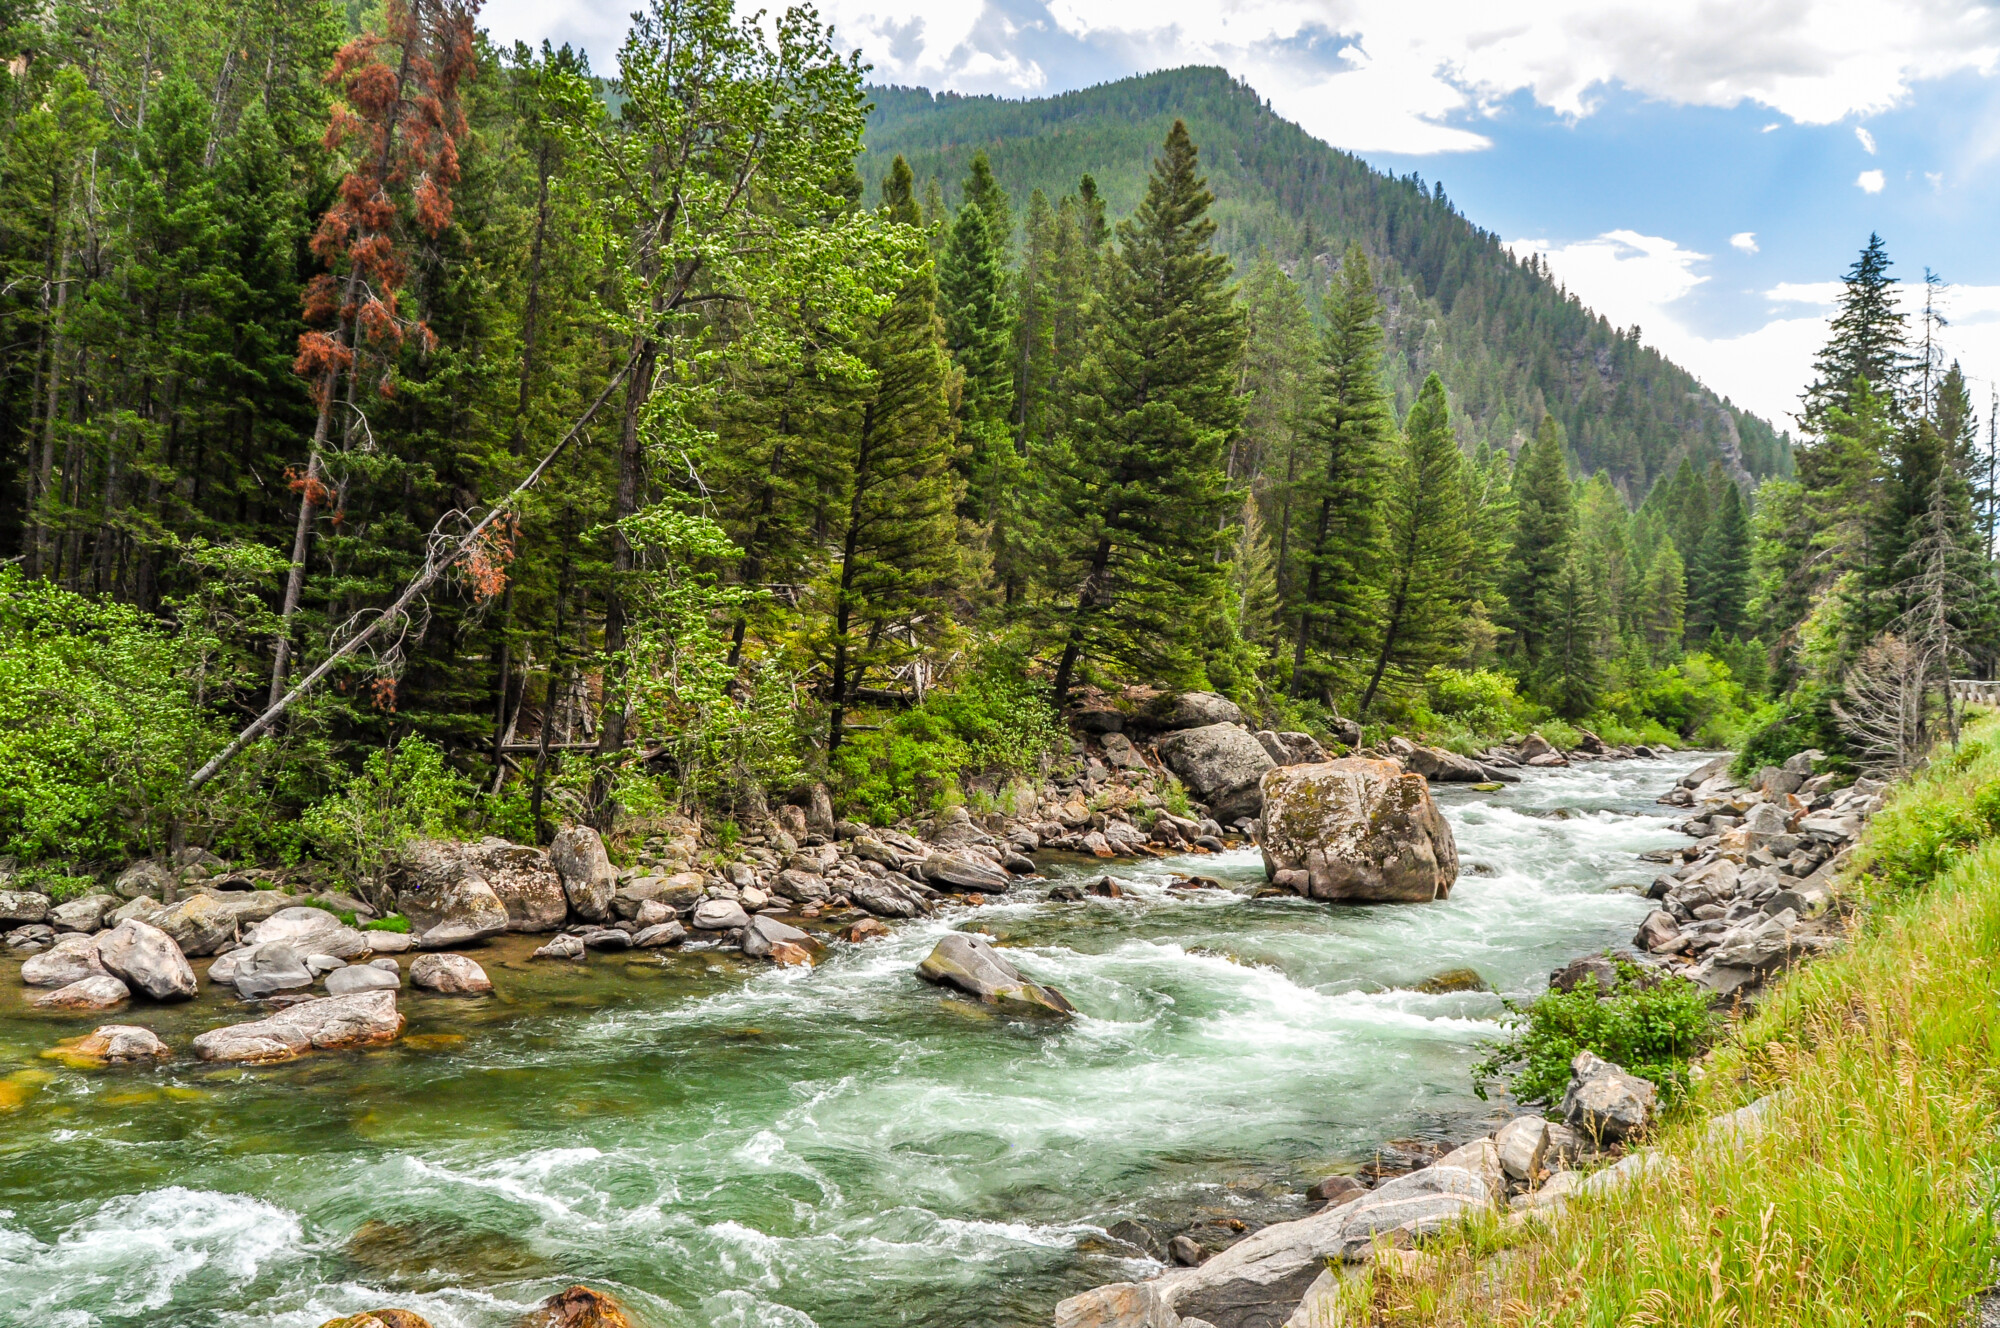 The Waters of the Gallatin River Flow Down From the Mountains of